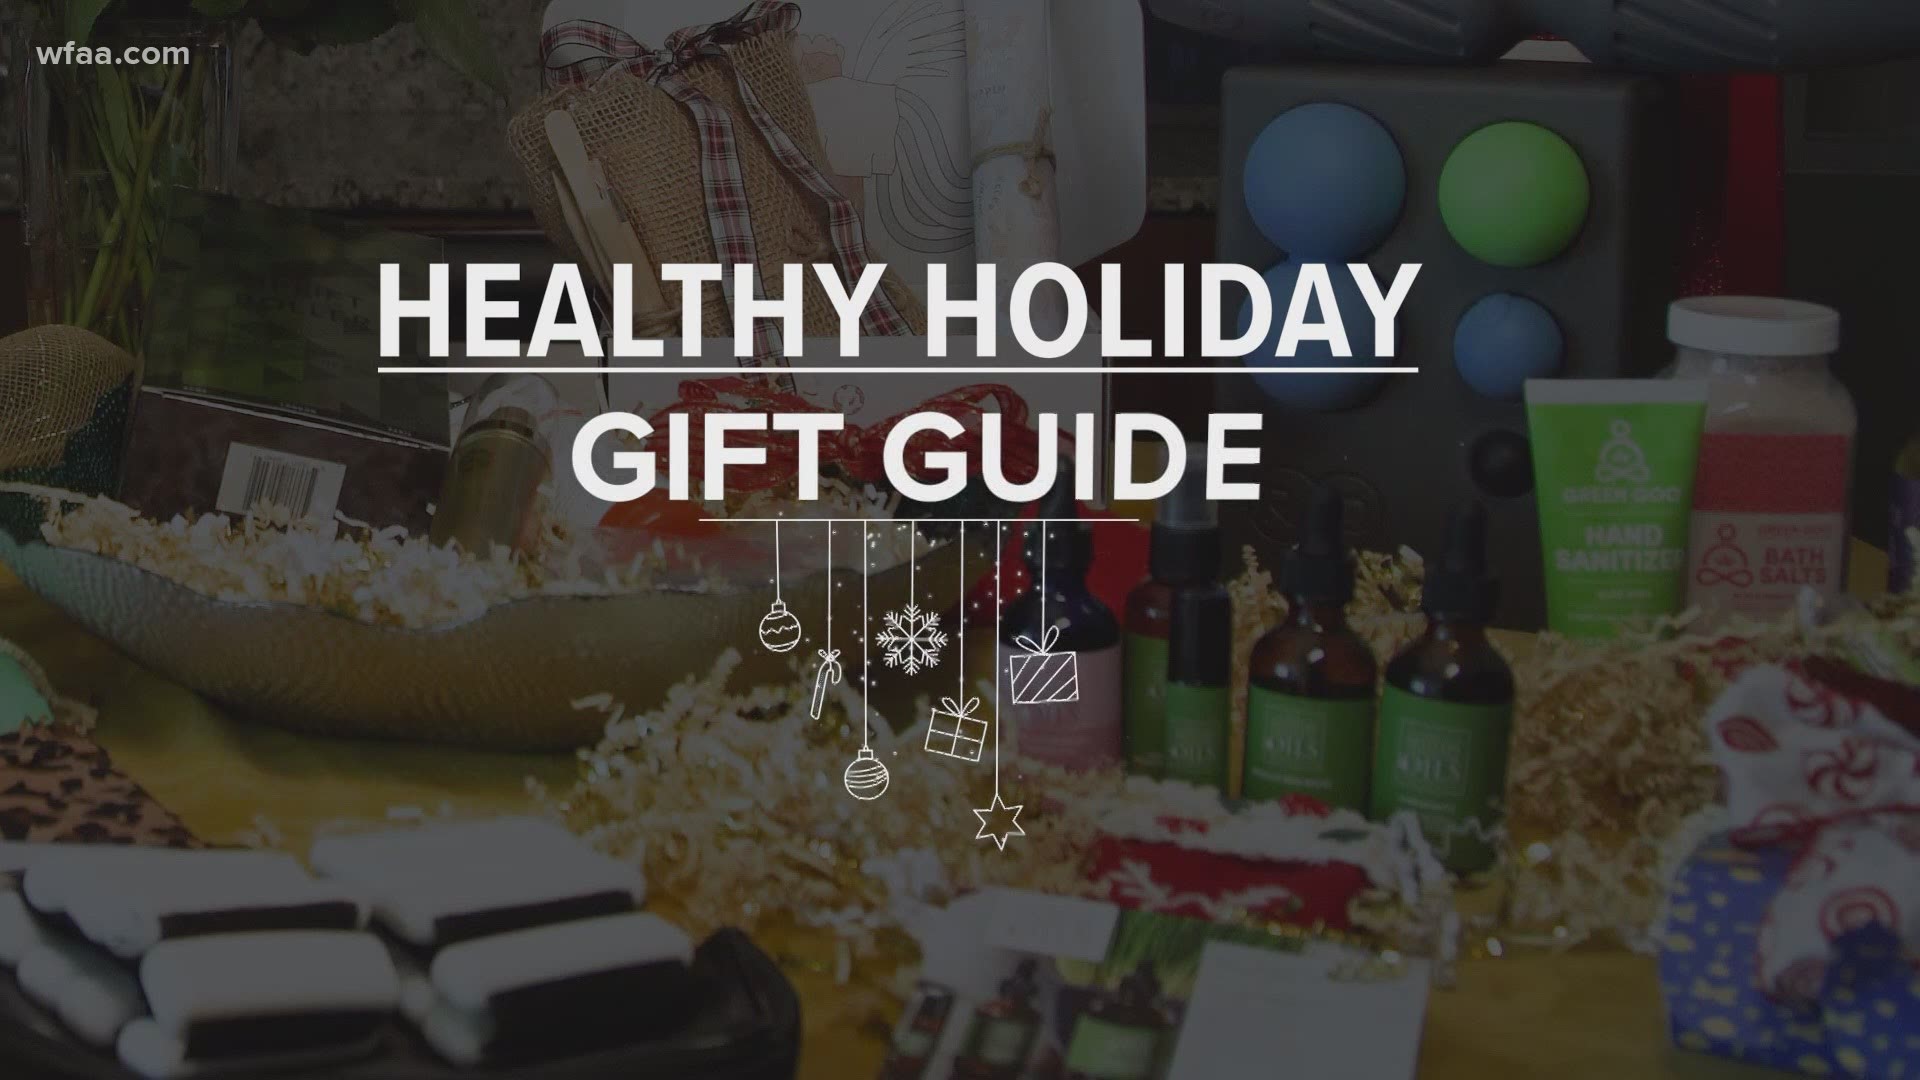 From beauty products to exercise equipment, health reporter Sonia Azad has a few ideas for holiday gifts